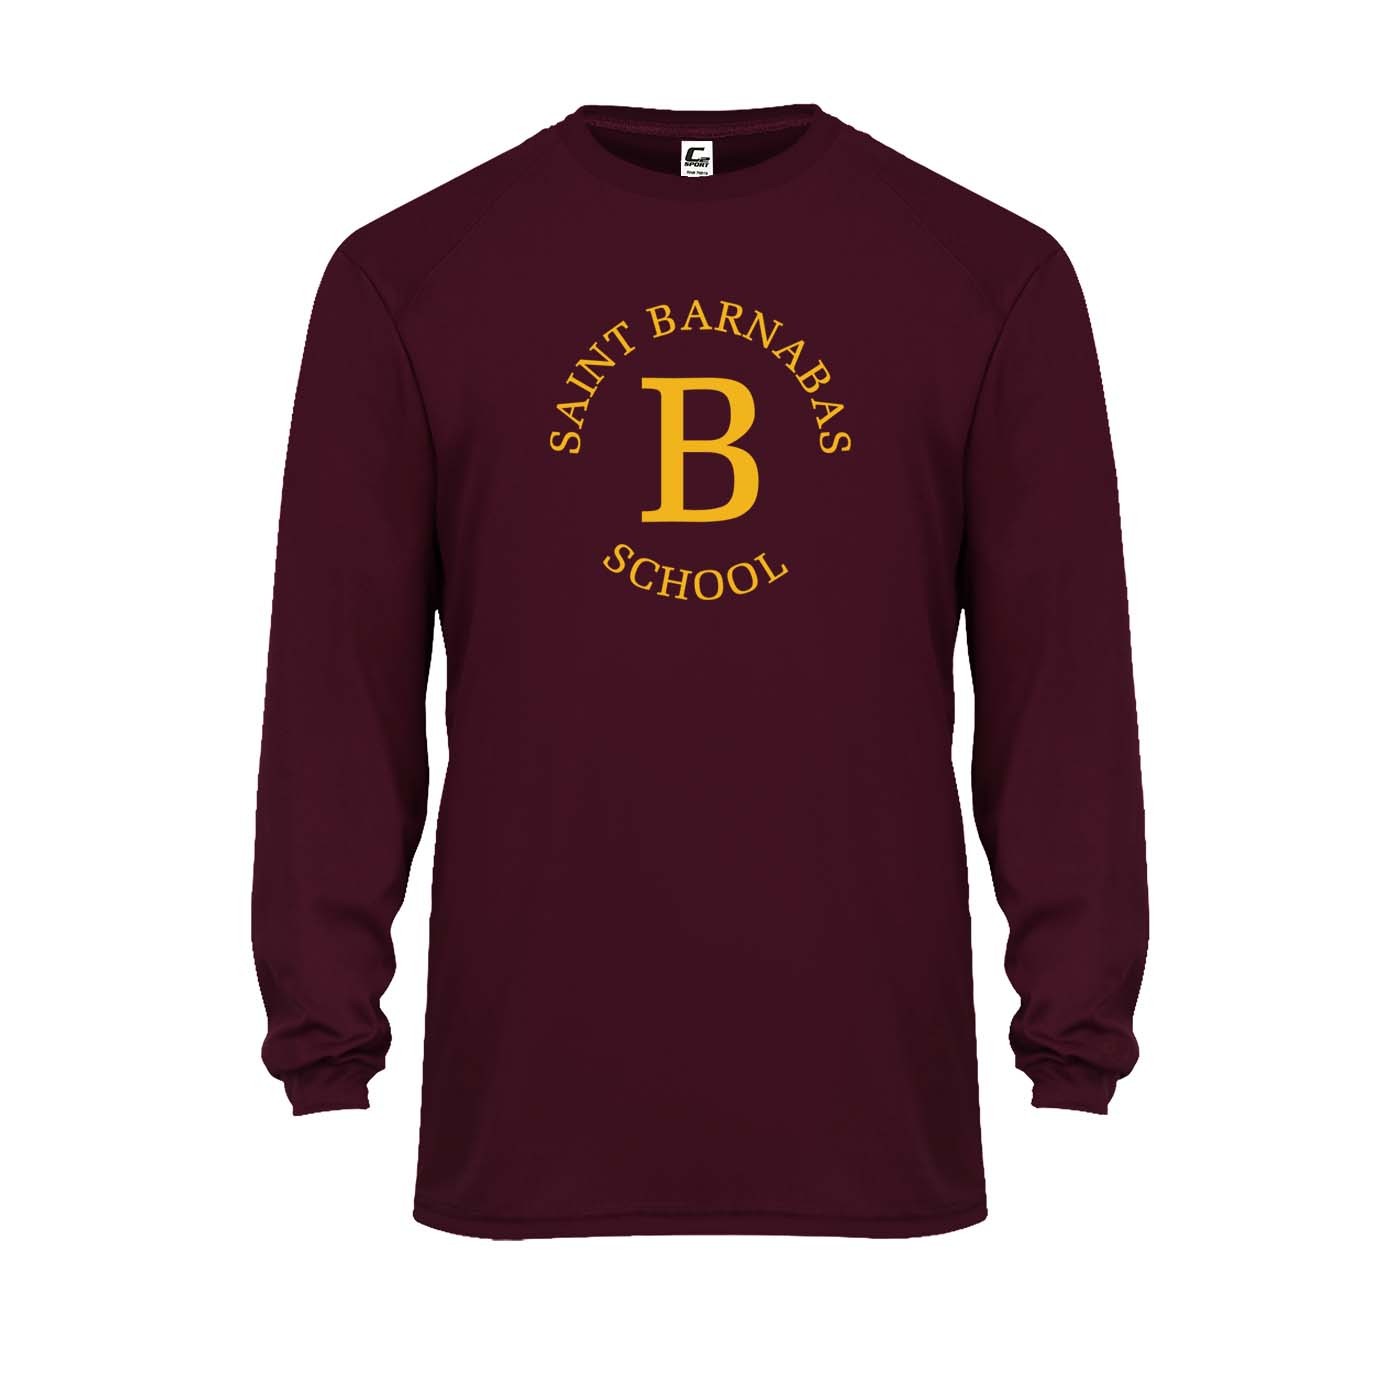 SBS L/S Spirit Performance T-Shirt w/ Gold Logo - Please Allow 2-3 Weeks for Delivery